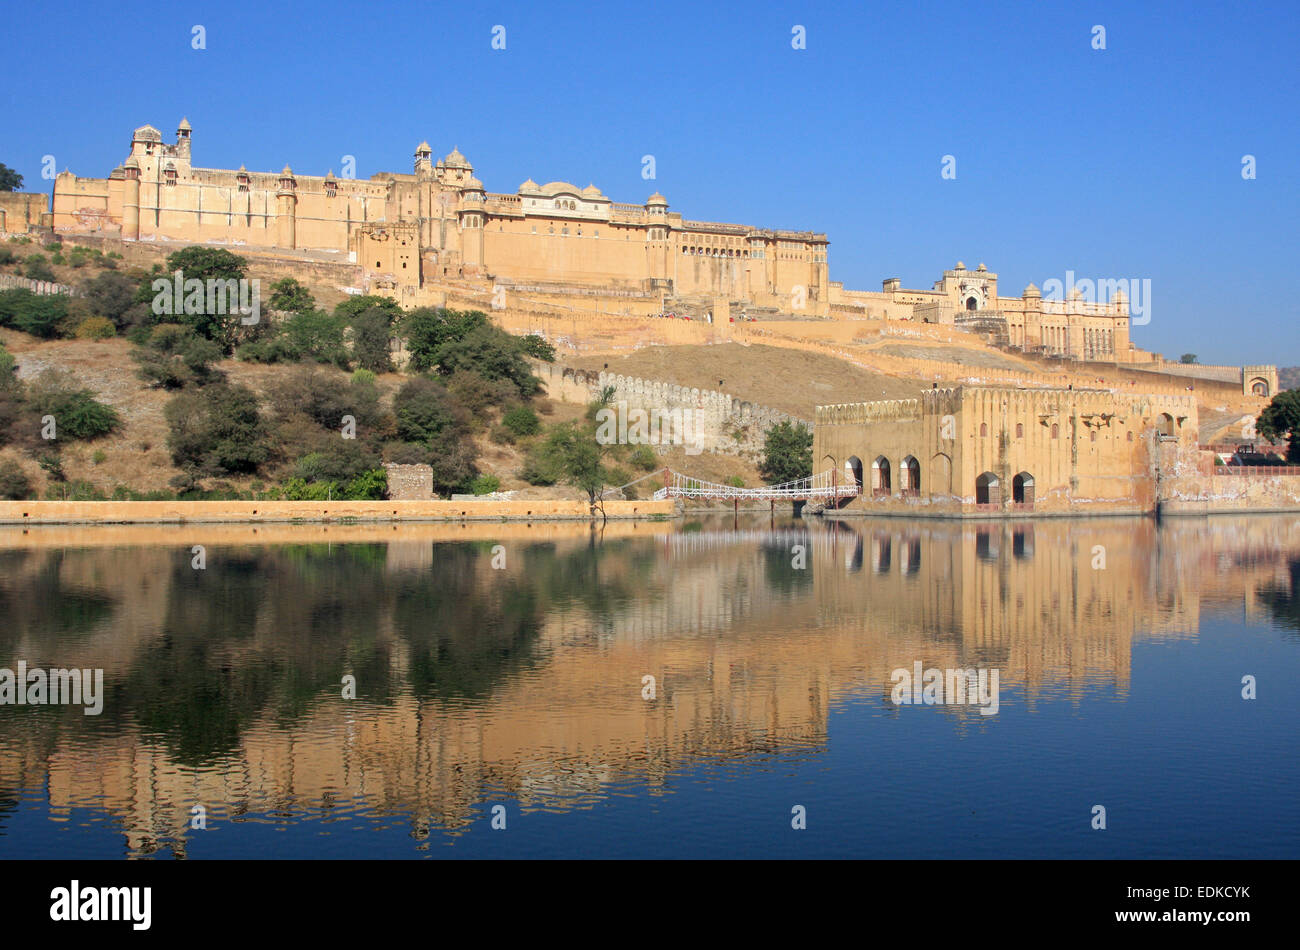 Amer (or Amber) Palace, also known as Amer (or Amber) Fort, near Jaipur. Stock Photo